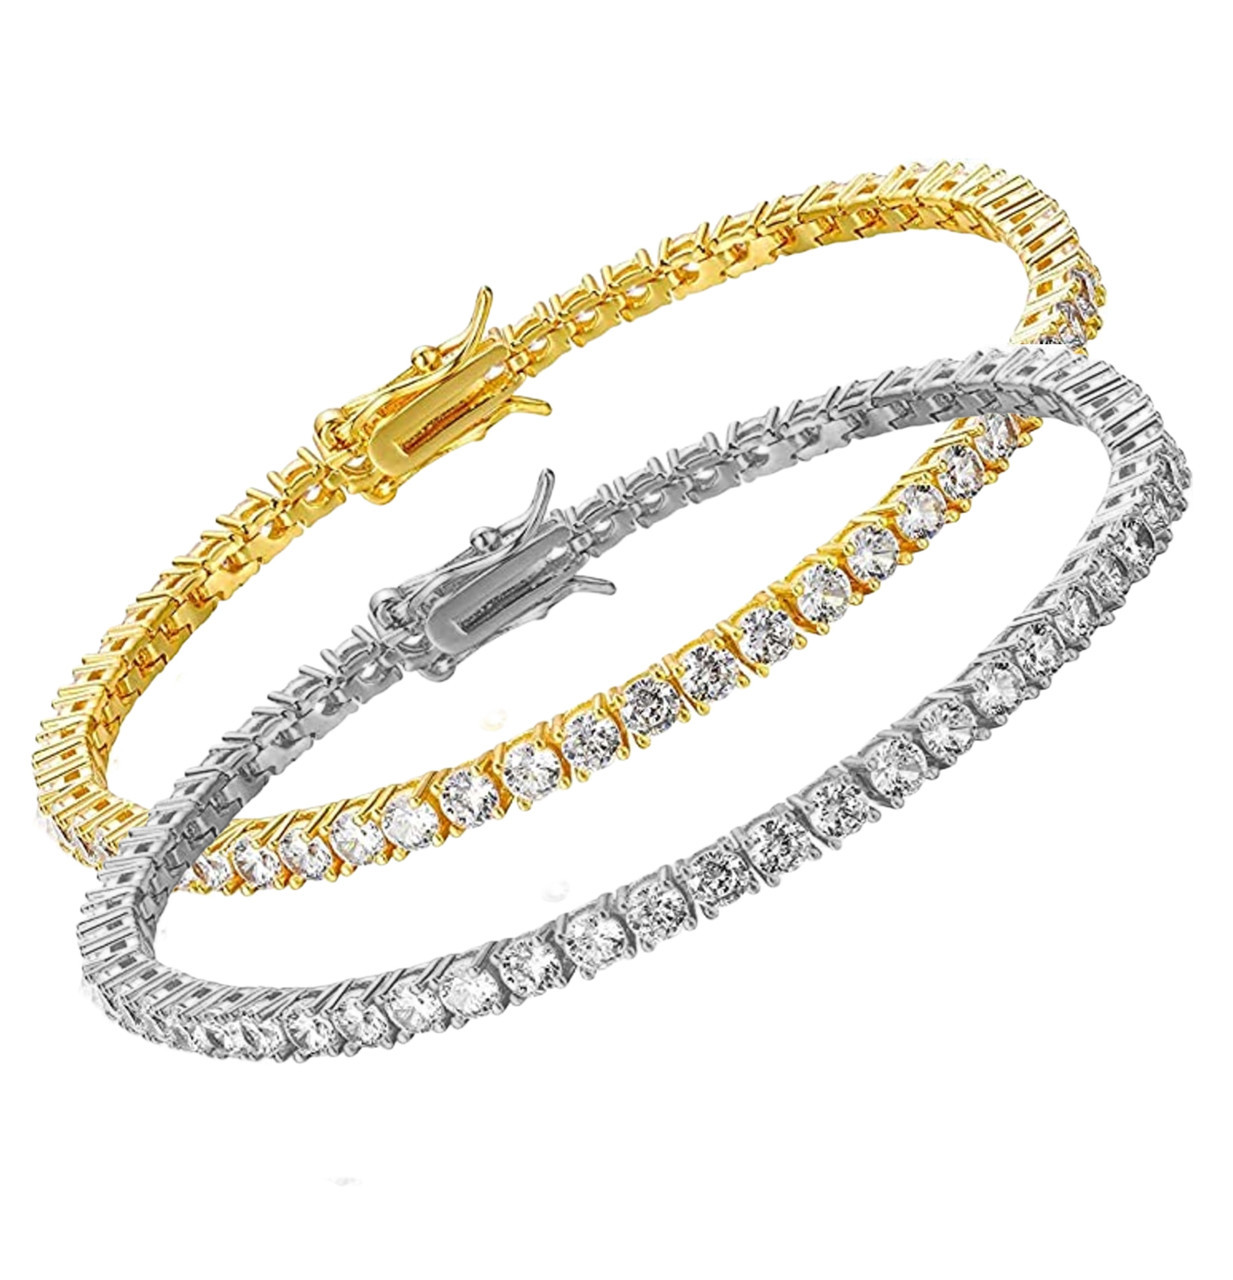 Elegant 14K or 18K Solid and Very Heavy White / Yellow / Or Rose